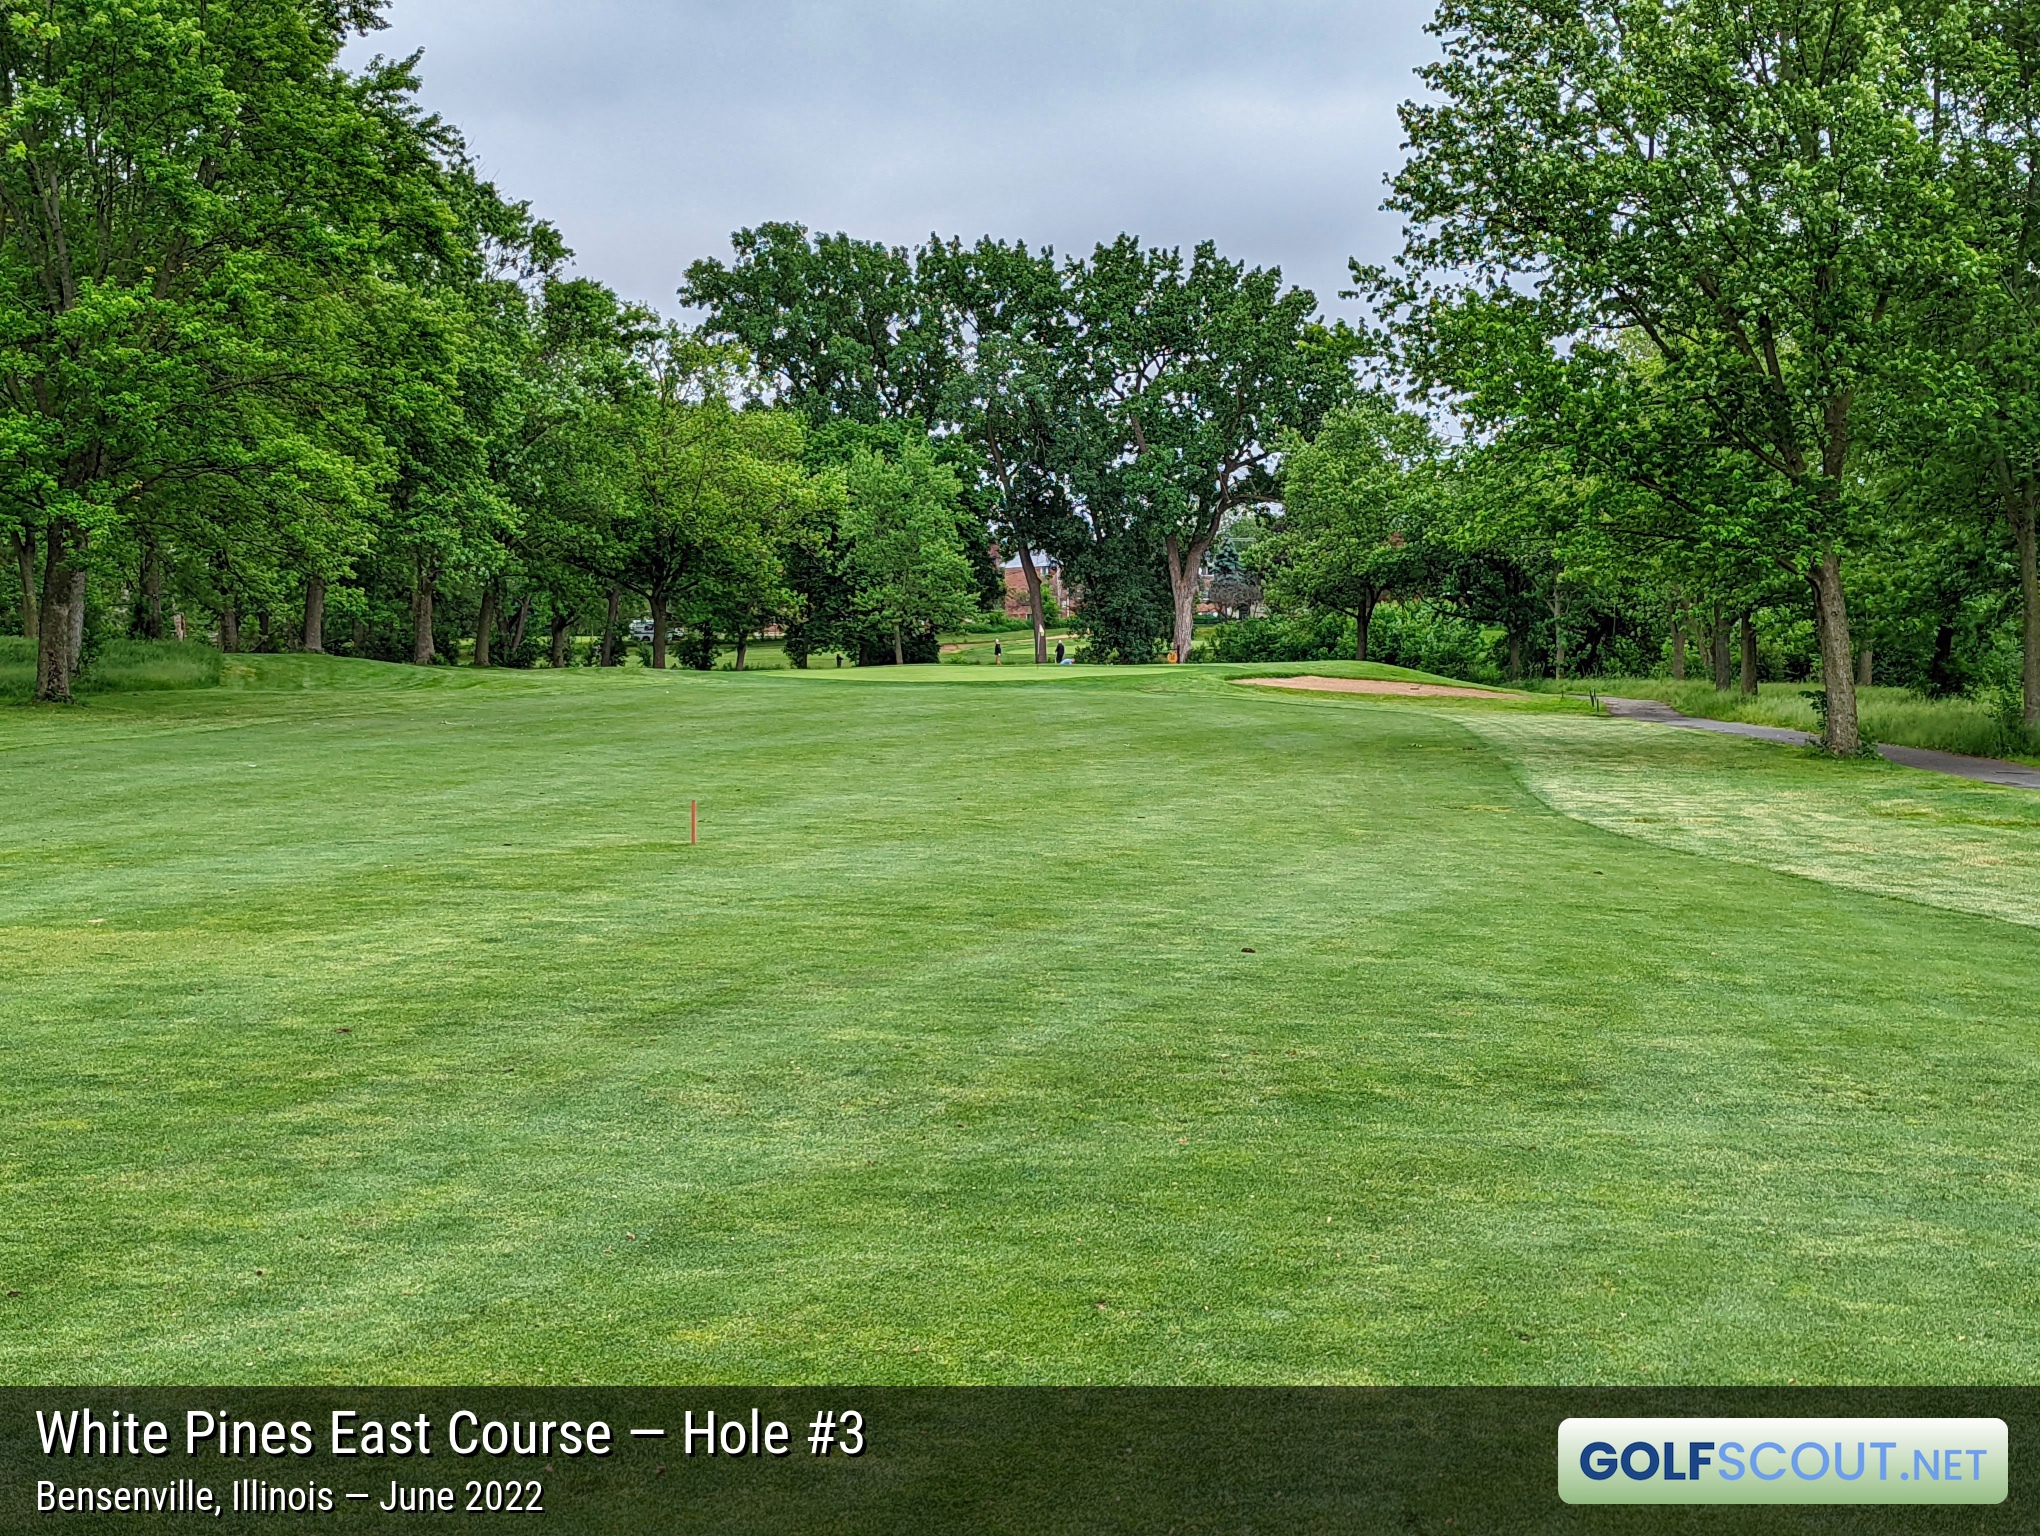 Photo of hole #3 at White Pines East Course in Bensenville, Illinois. 